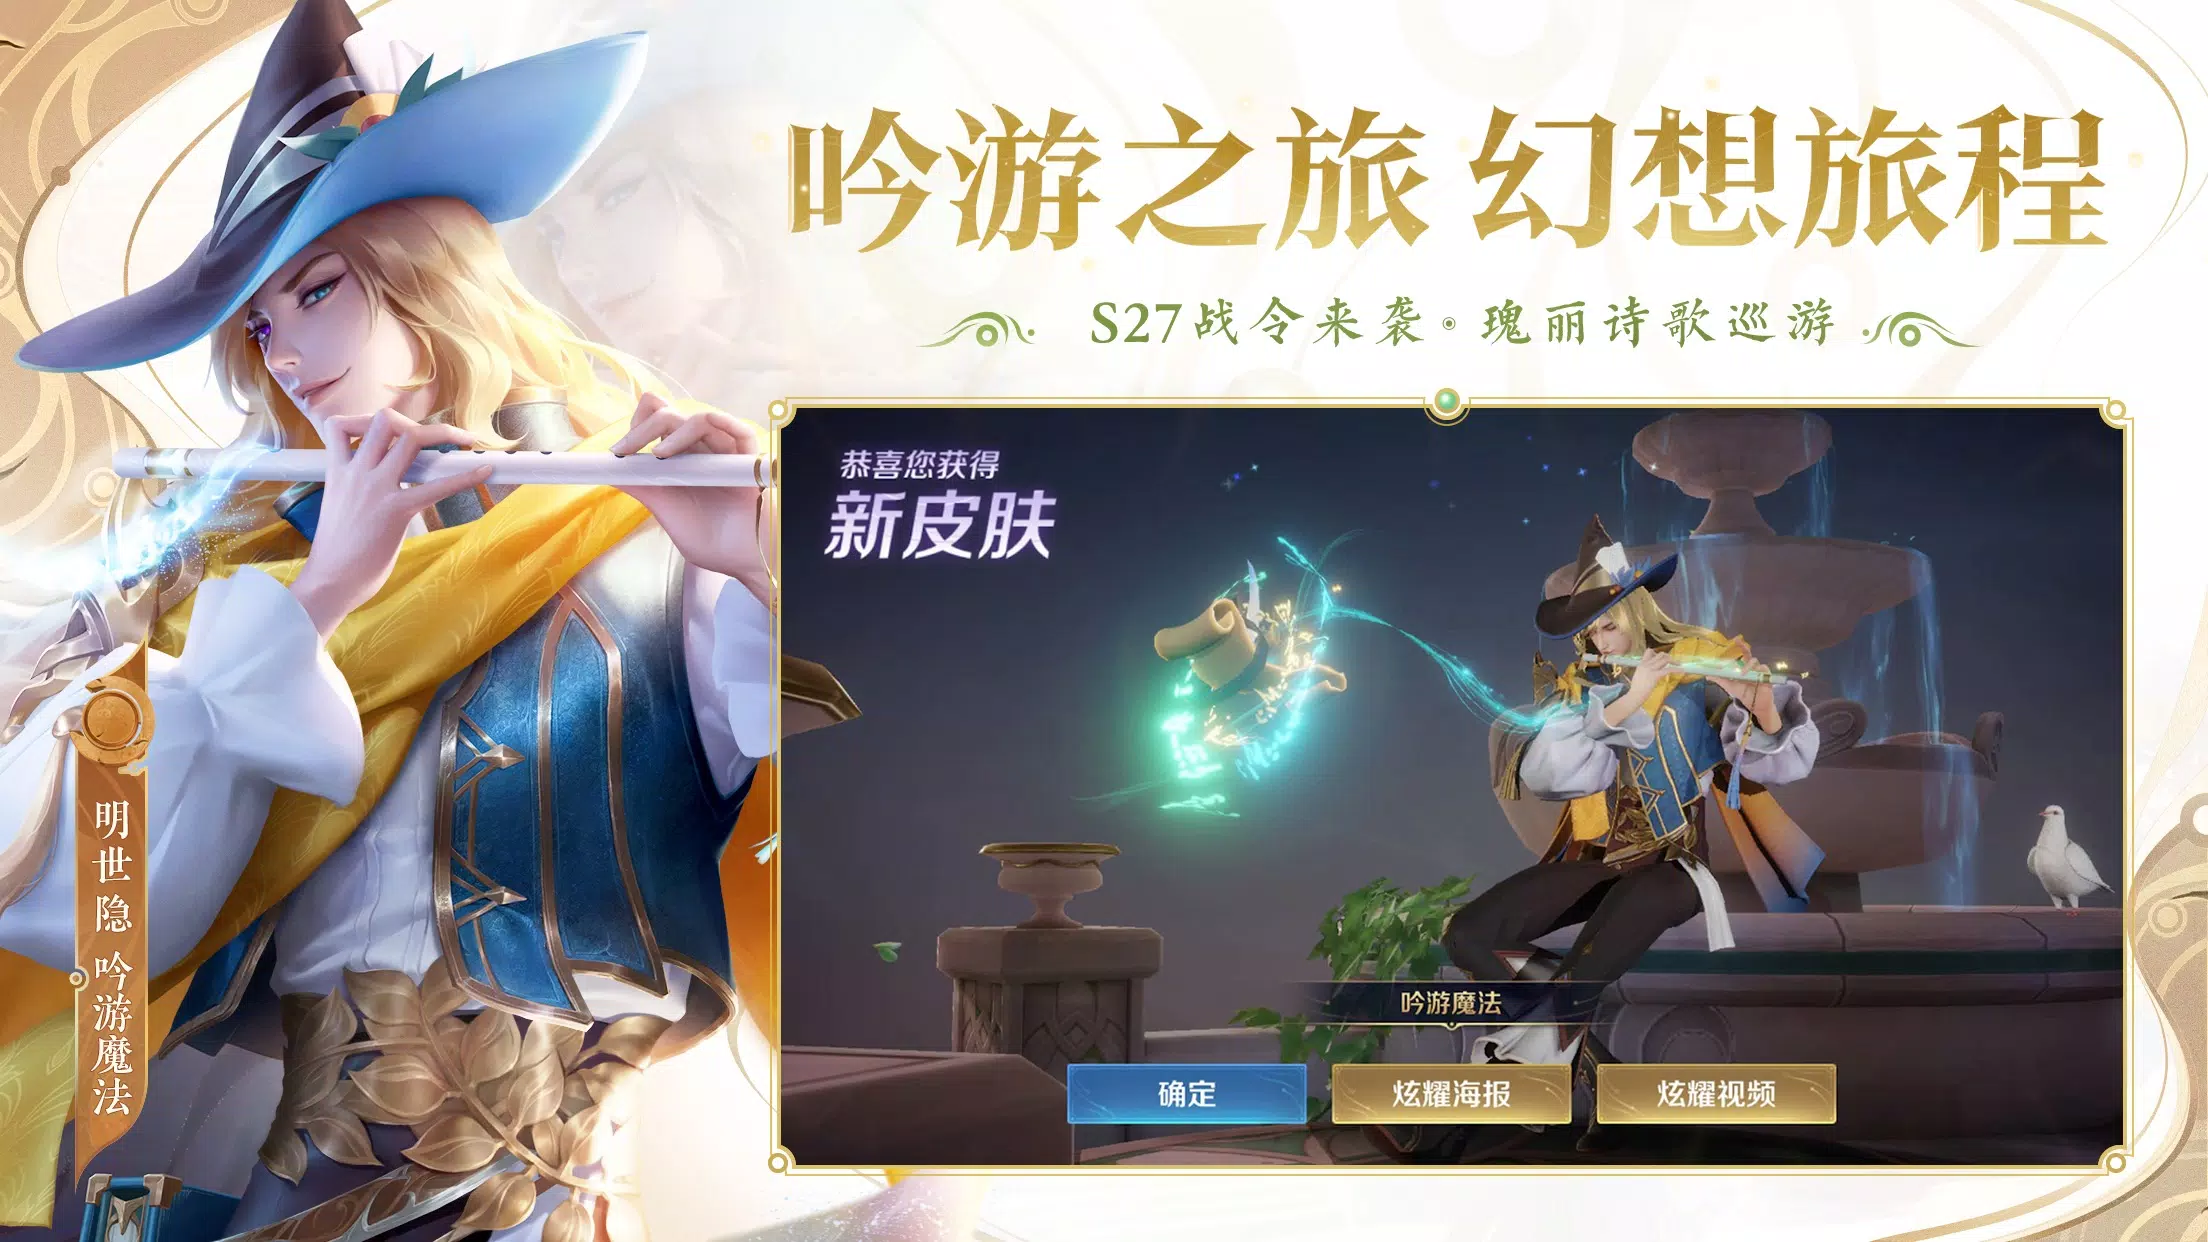 Honor of Kings APK Download for Android Free